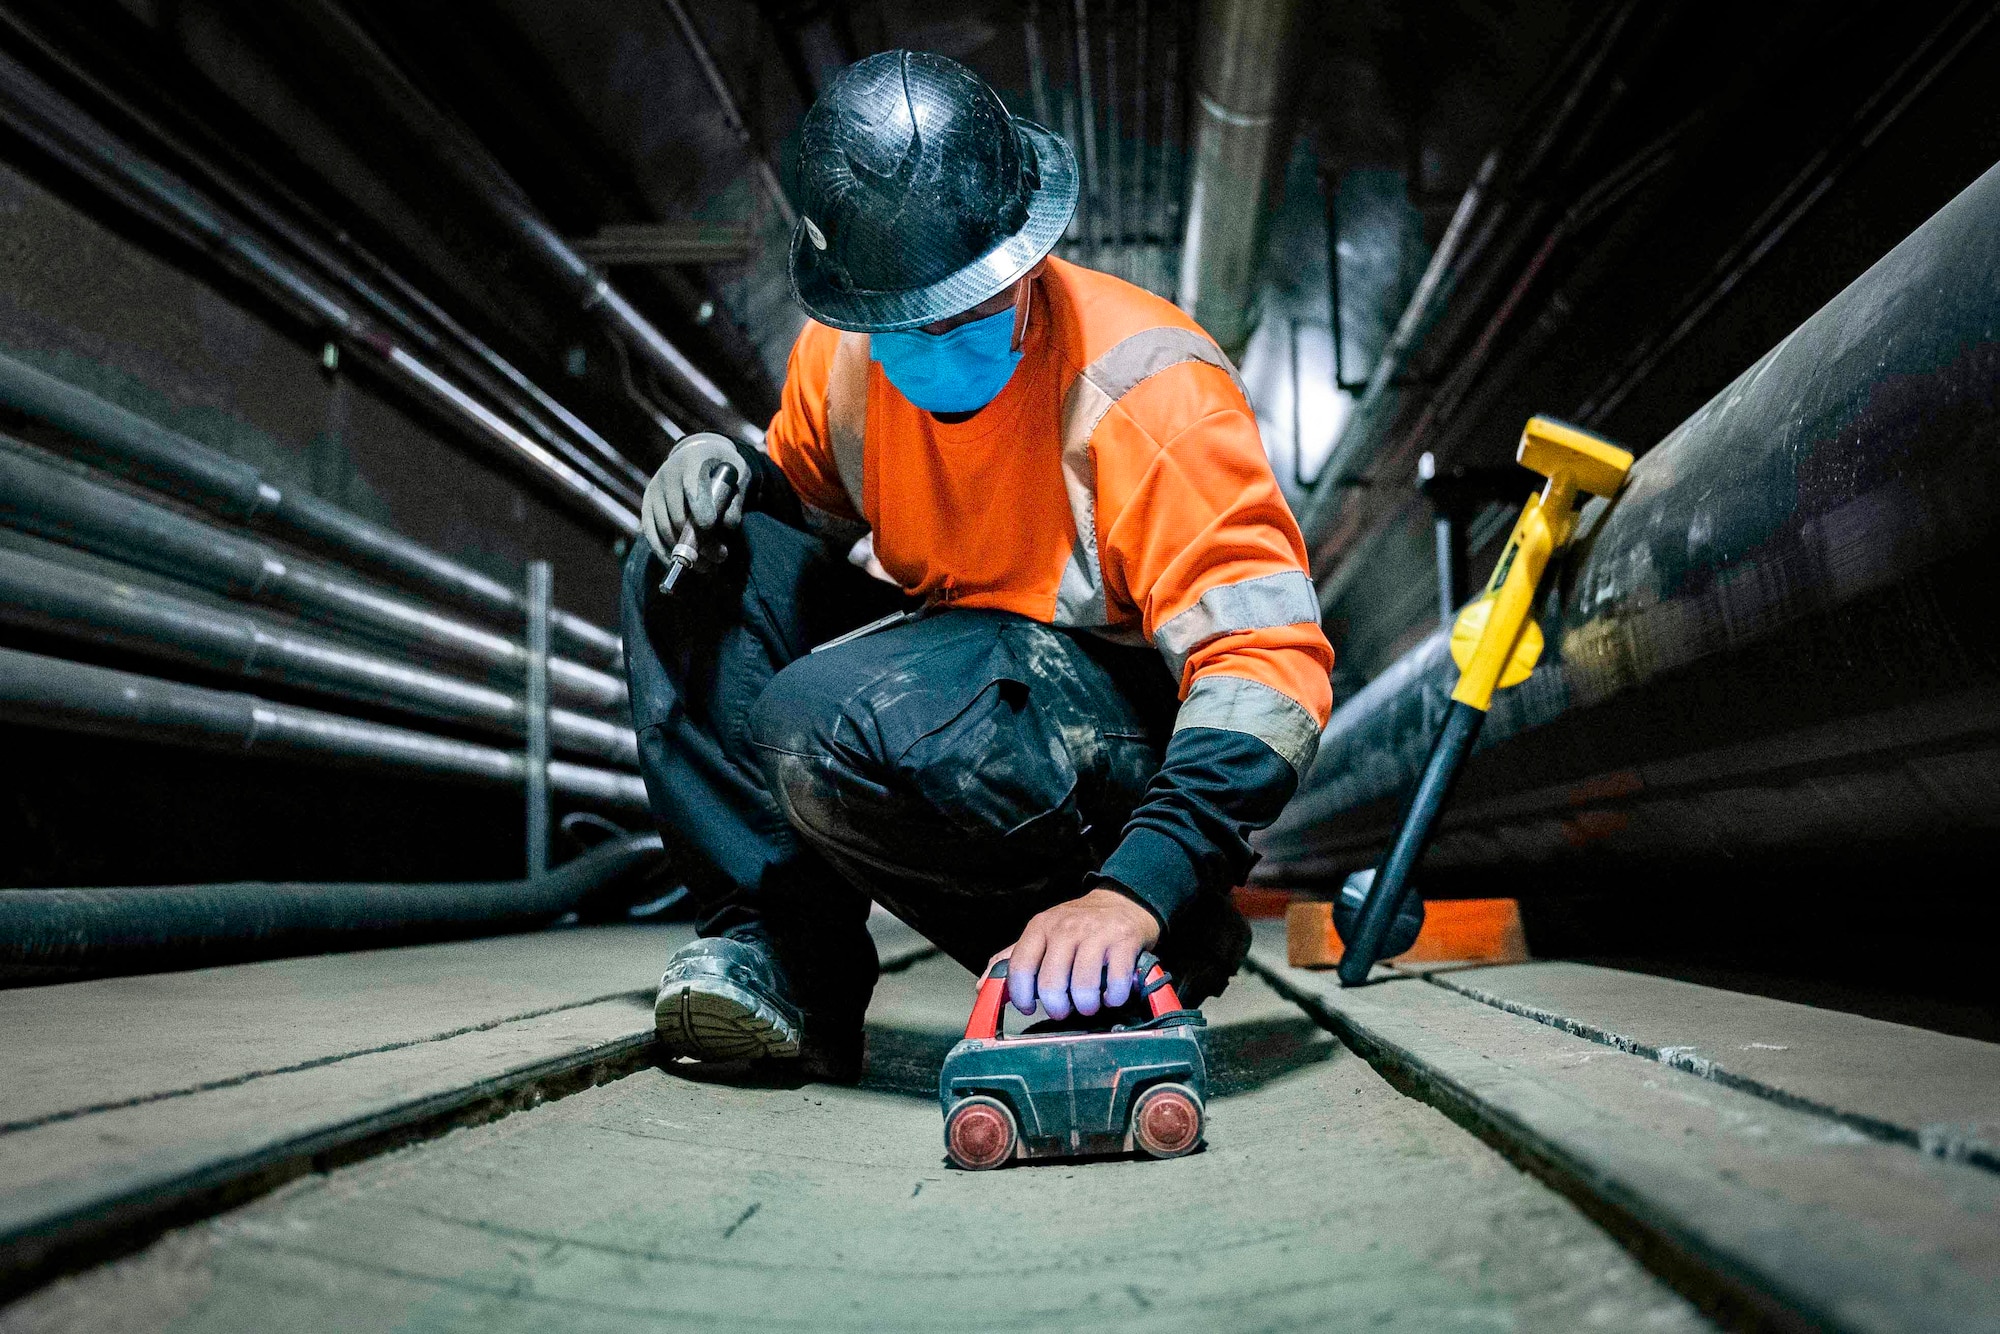 A contractor wearing a face mask kneels down to use a tool.